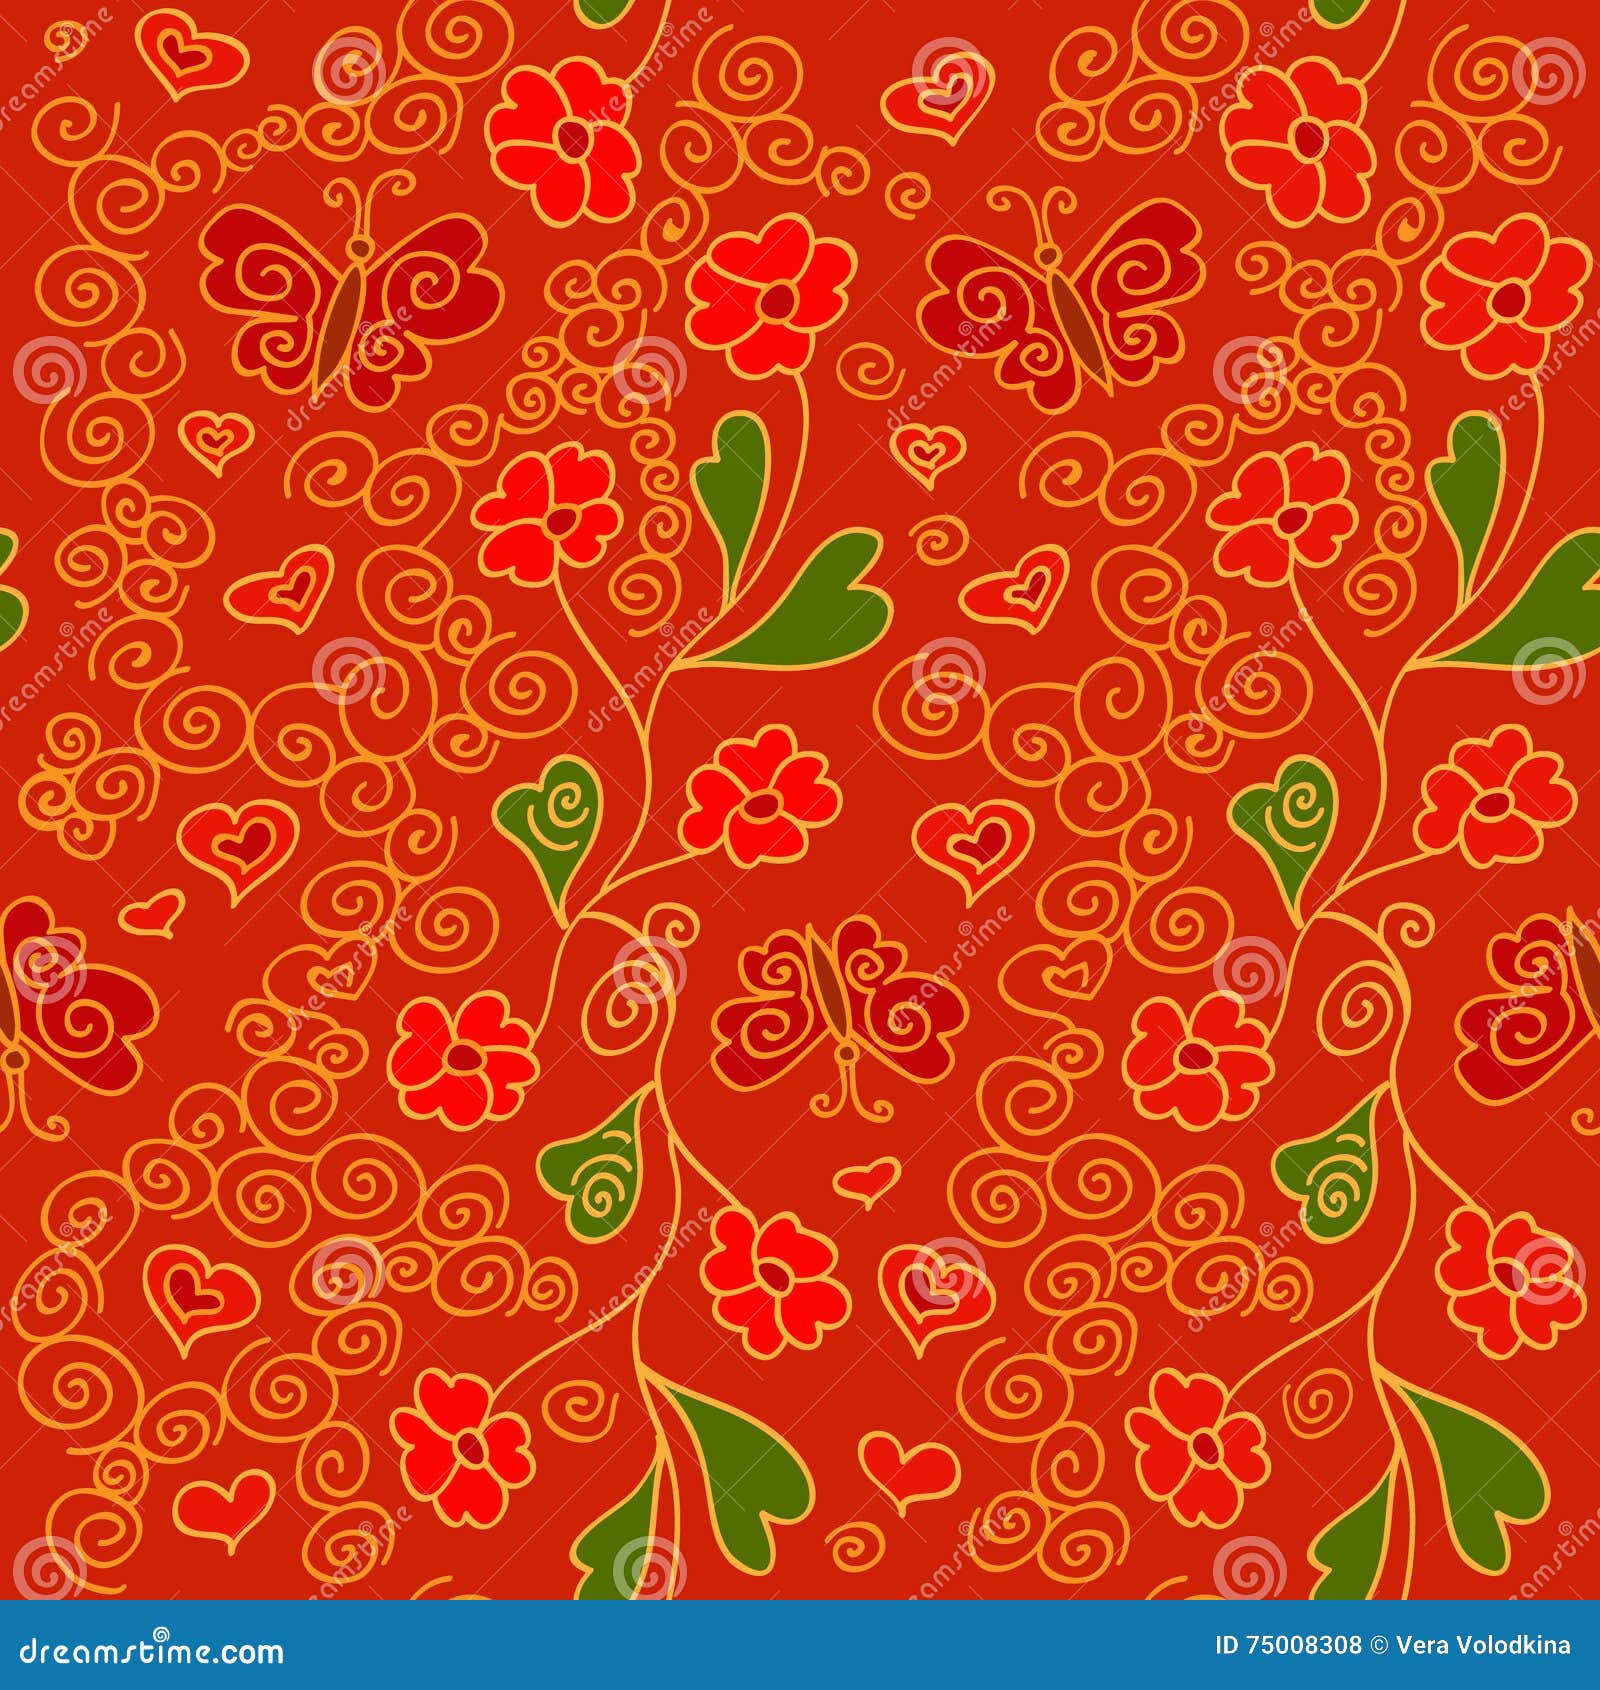 seamless pattern with flowers, butterflies and hearts. vitrage style.